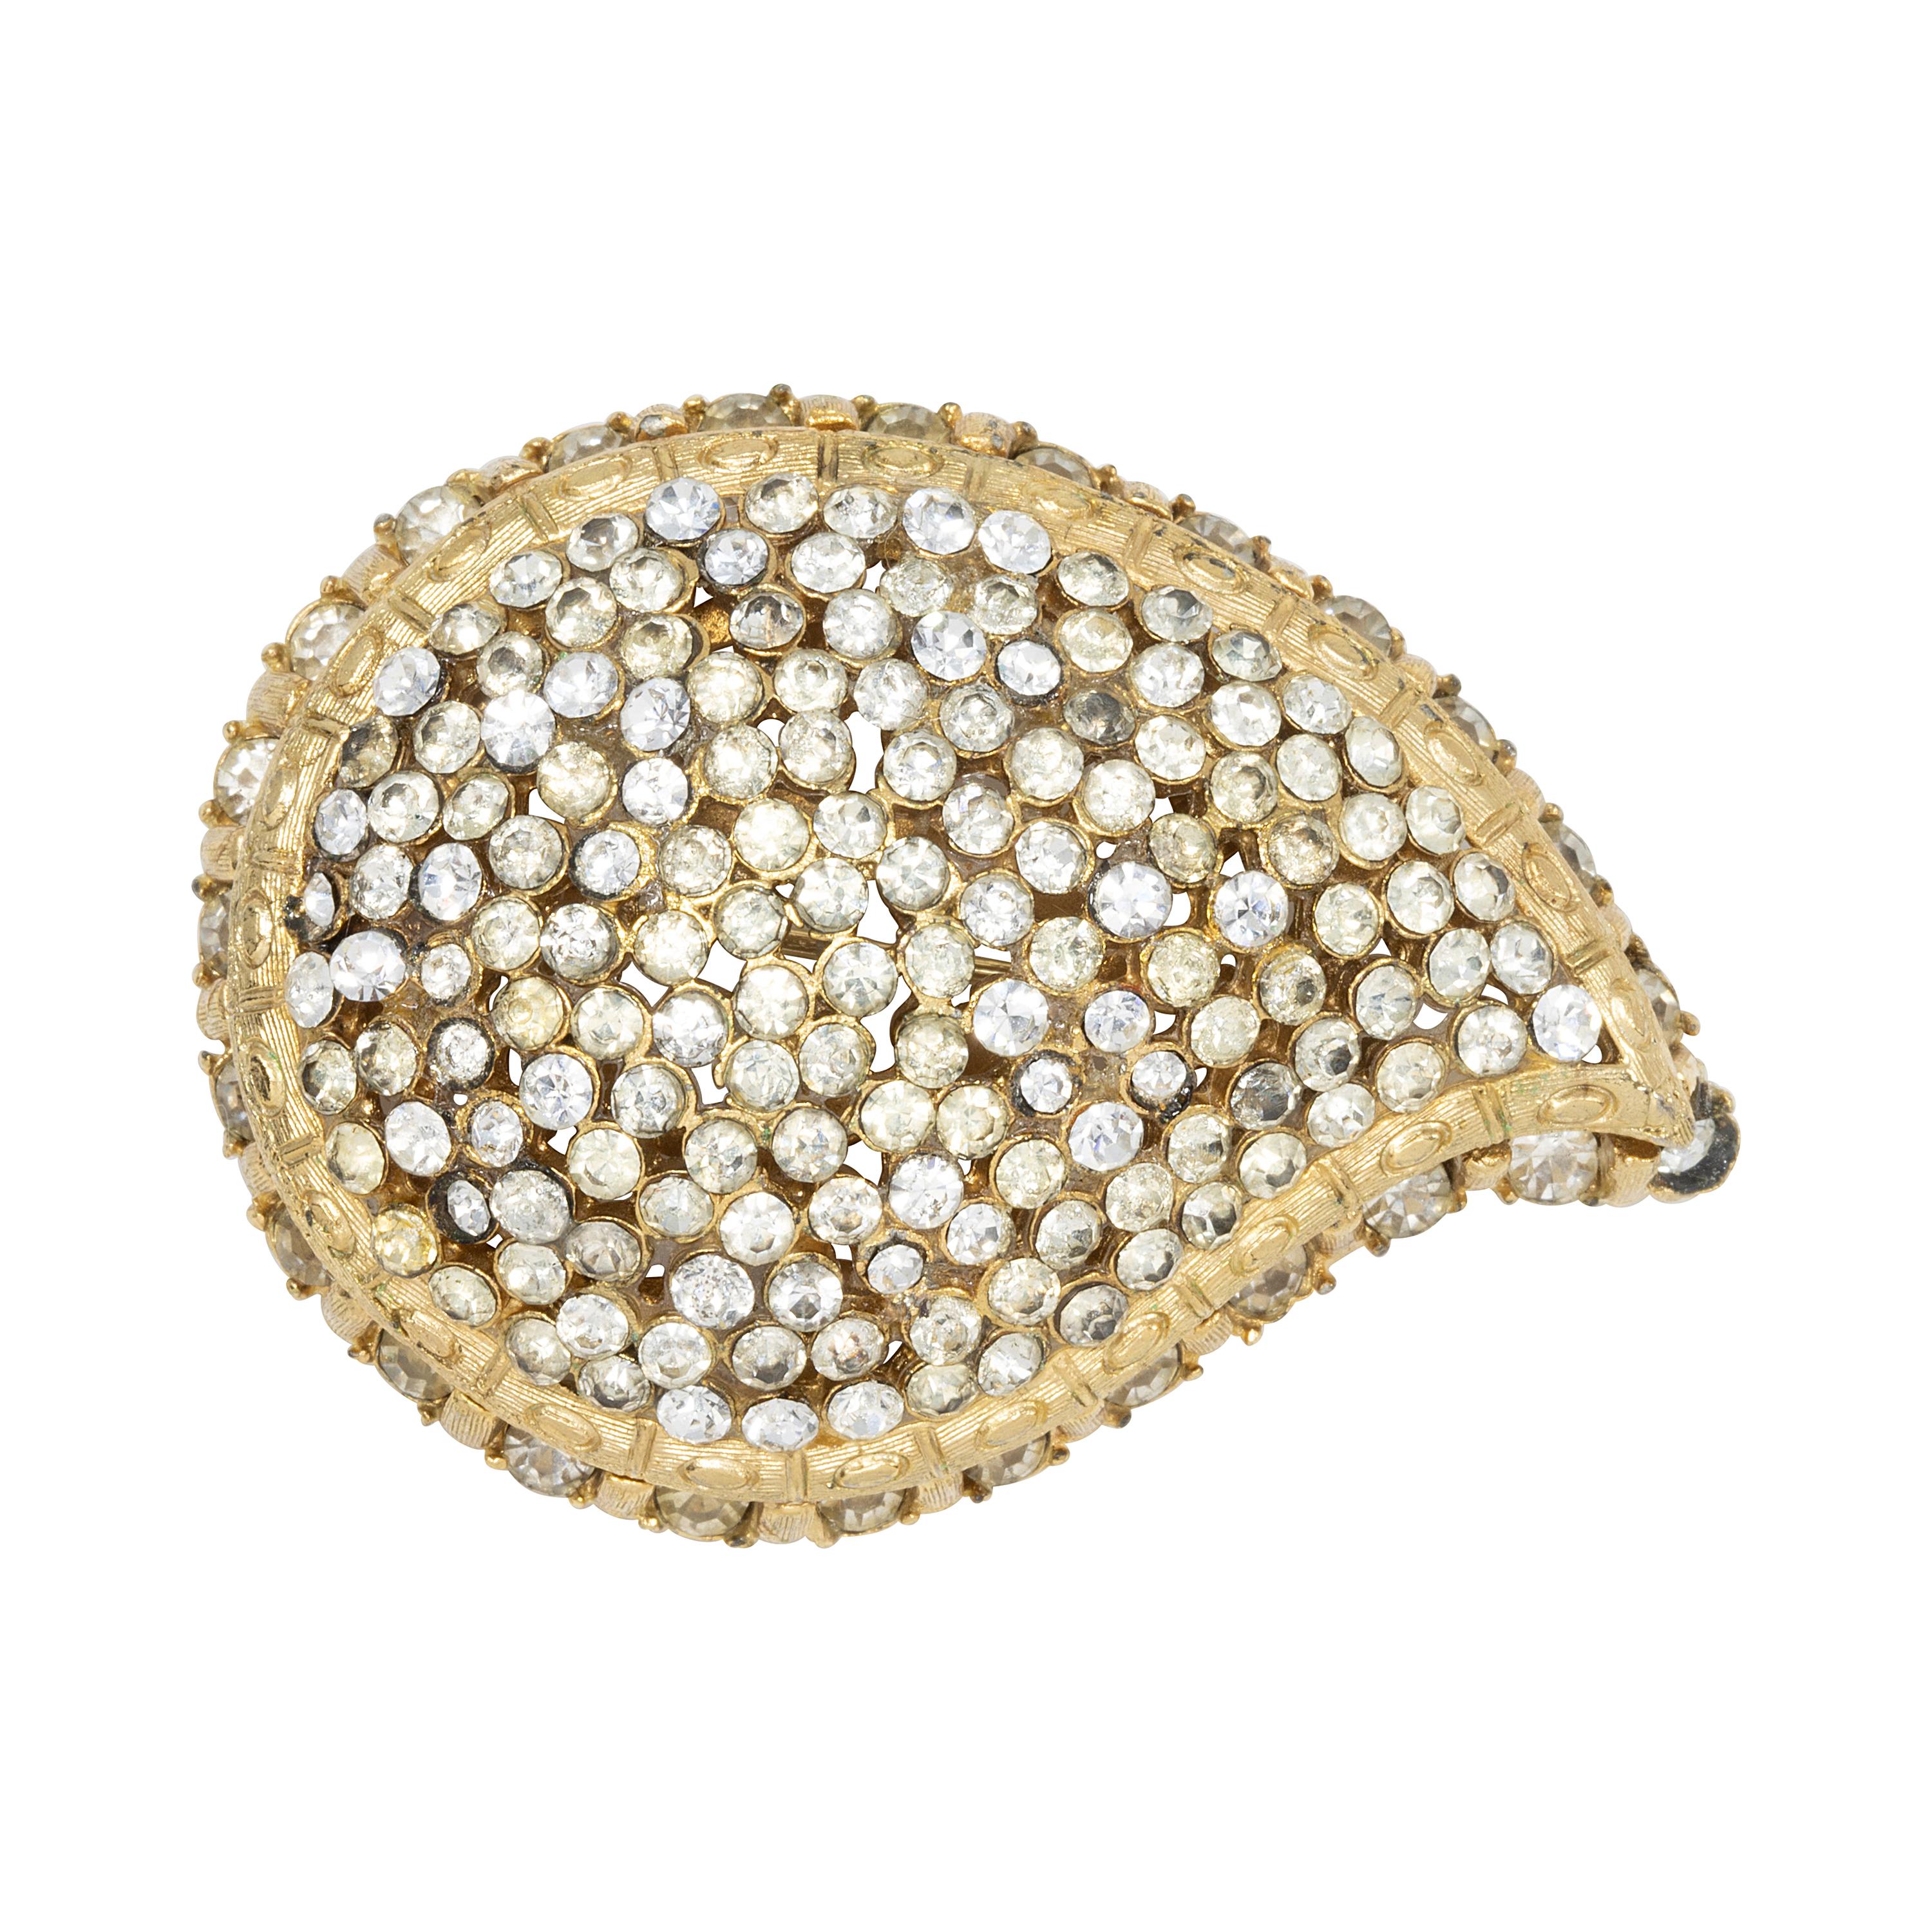 Capri Golden Paisley Pin Brooch with Clear Pave Crystals, 1960s For Sale